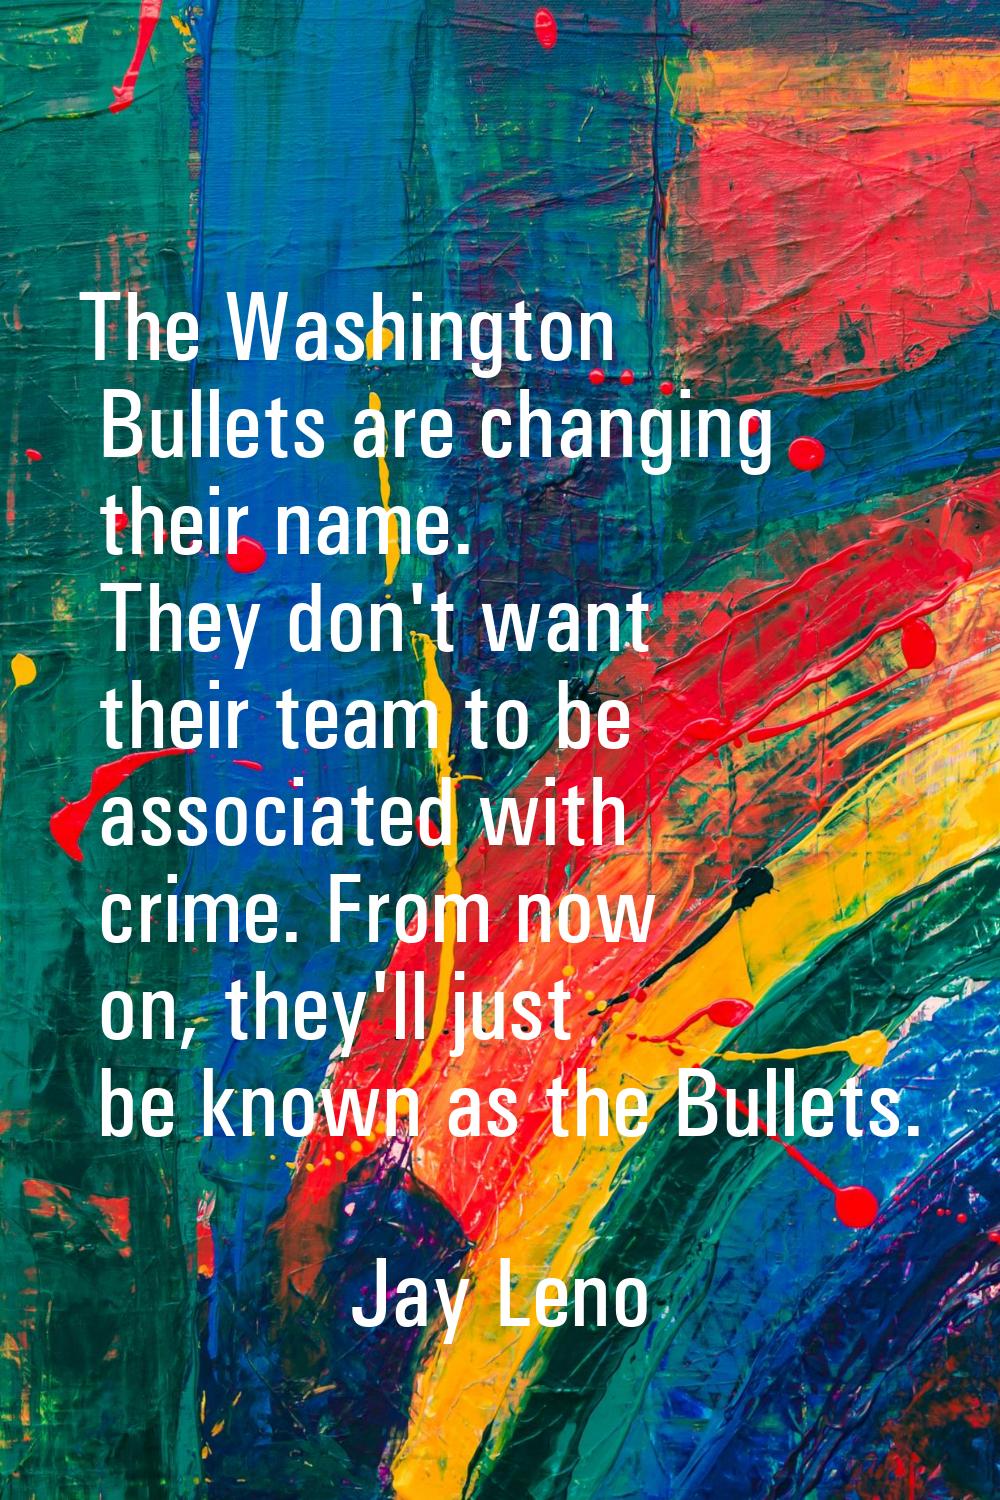 The Washington Bullets are changing their name. They don't want their team to be associated with cr